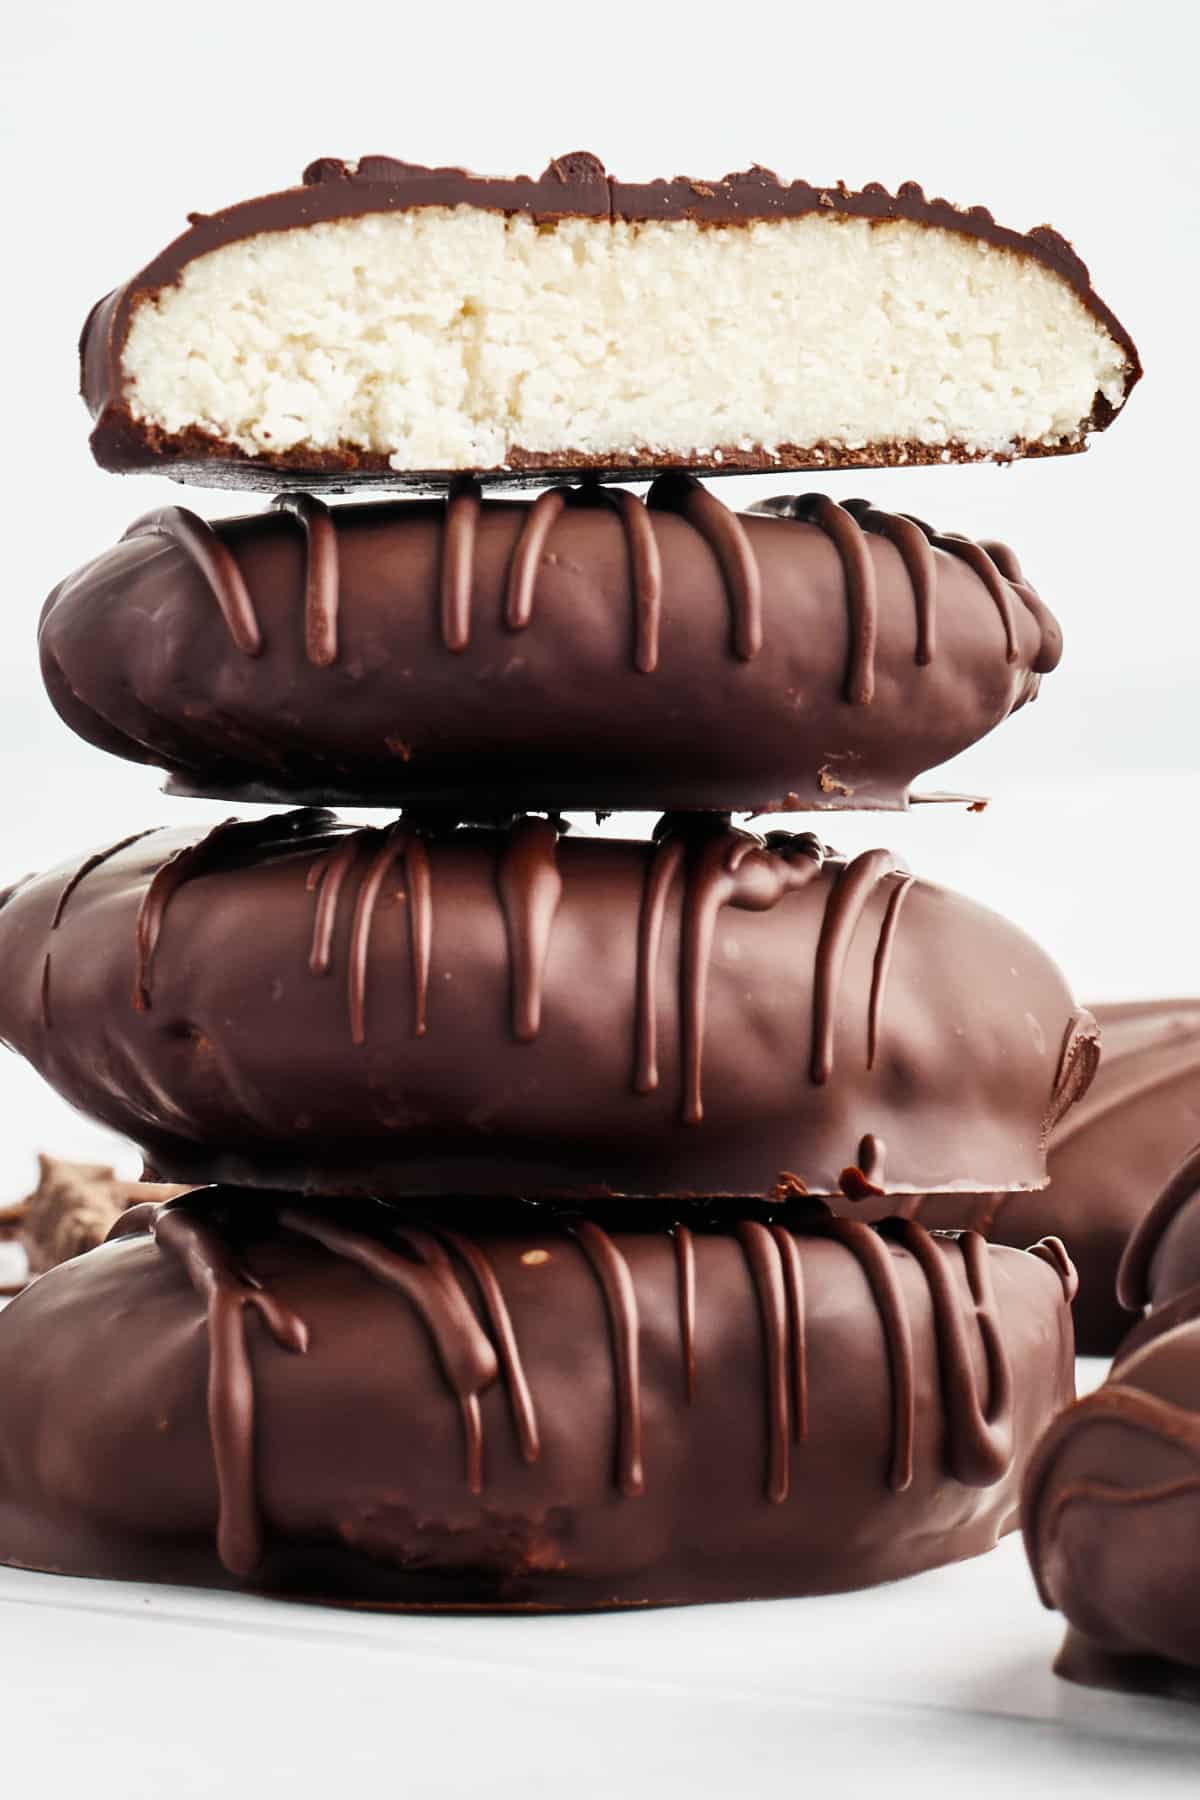 Side view of a stack of 4 peppermint patties on a white surface, with more sitting next to the stack. The top one on the stack is sliced open to see the bright white peppermint filling.